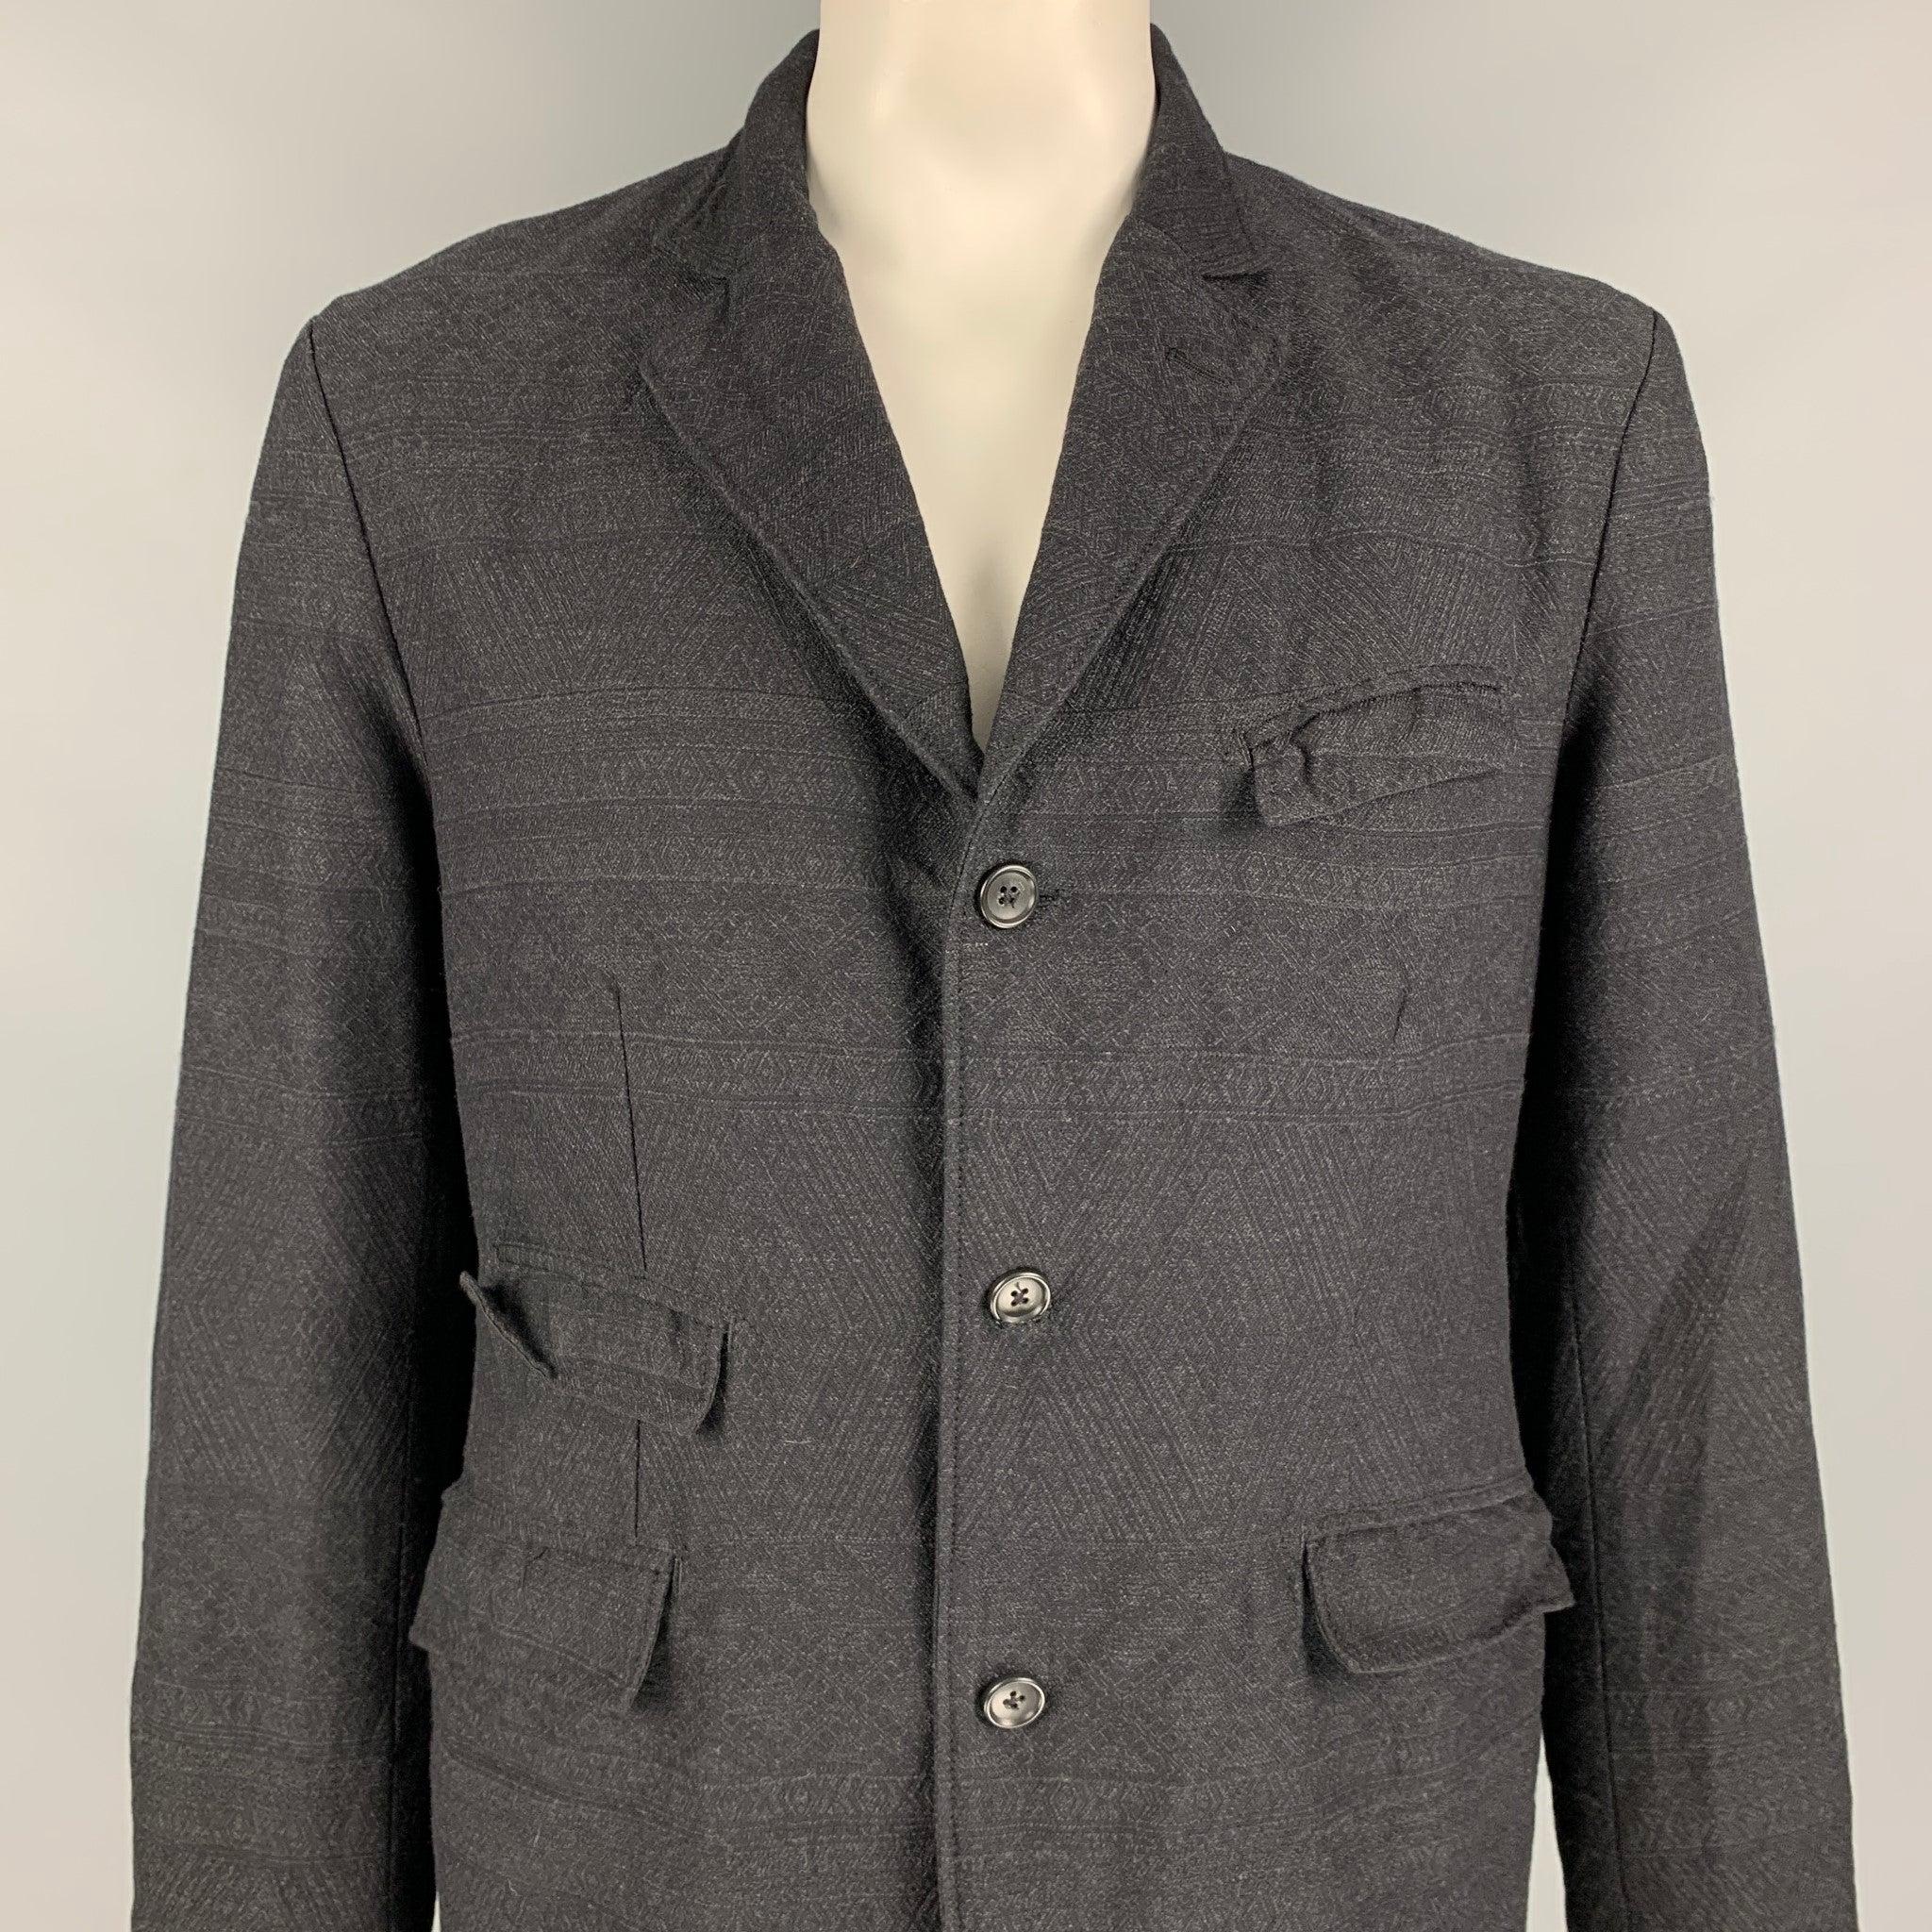 ENGINEERED GARMENTS jacket comes in a charcoal textured cotton / wool with a full liner featuring a notch lapel, flap pockets, and a three button closure. Made in USA.
Very Good
Pre-Owned Condition. 

Marked:   XL 

Measurements: 
 
Shoulder: 19